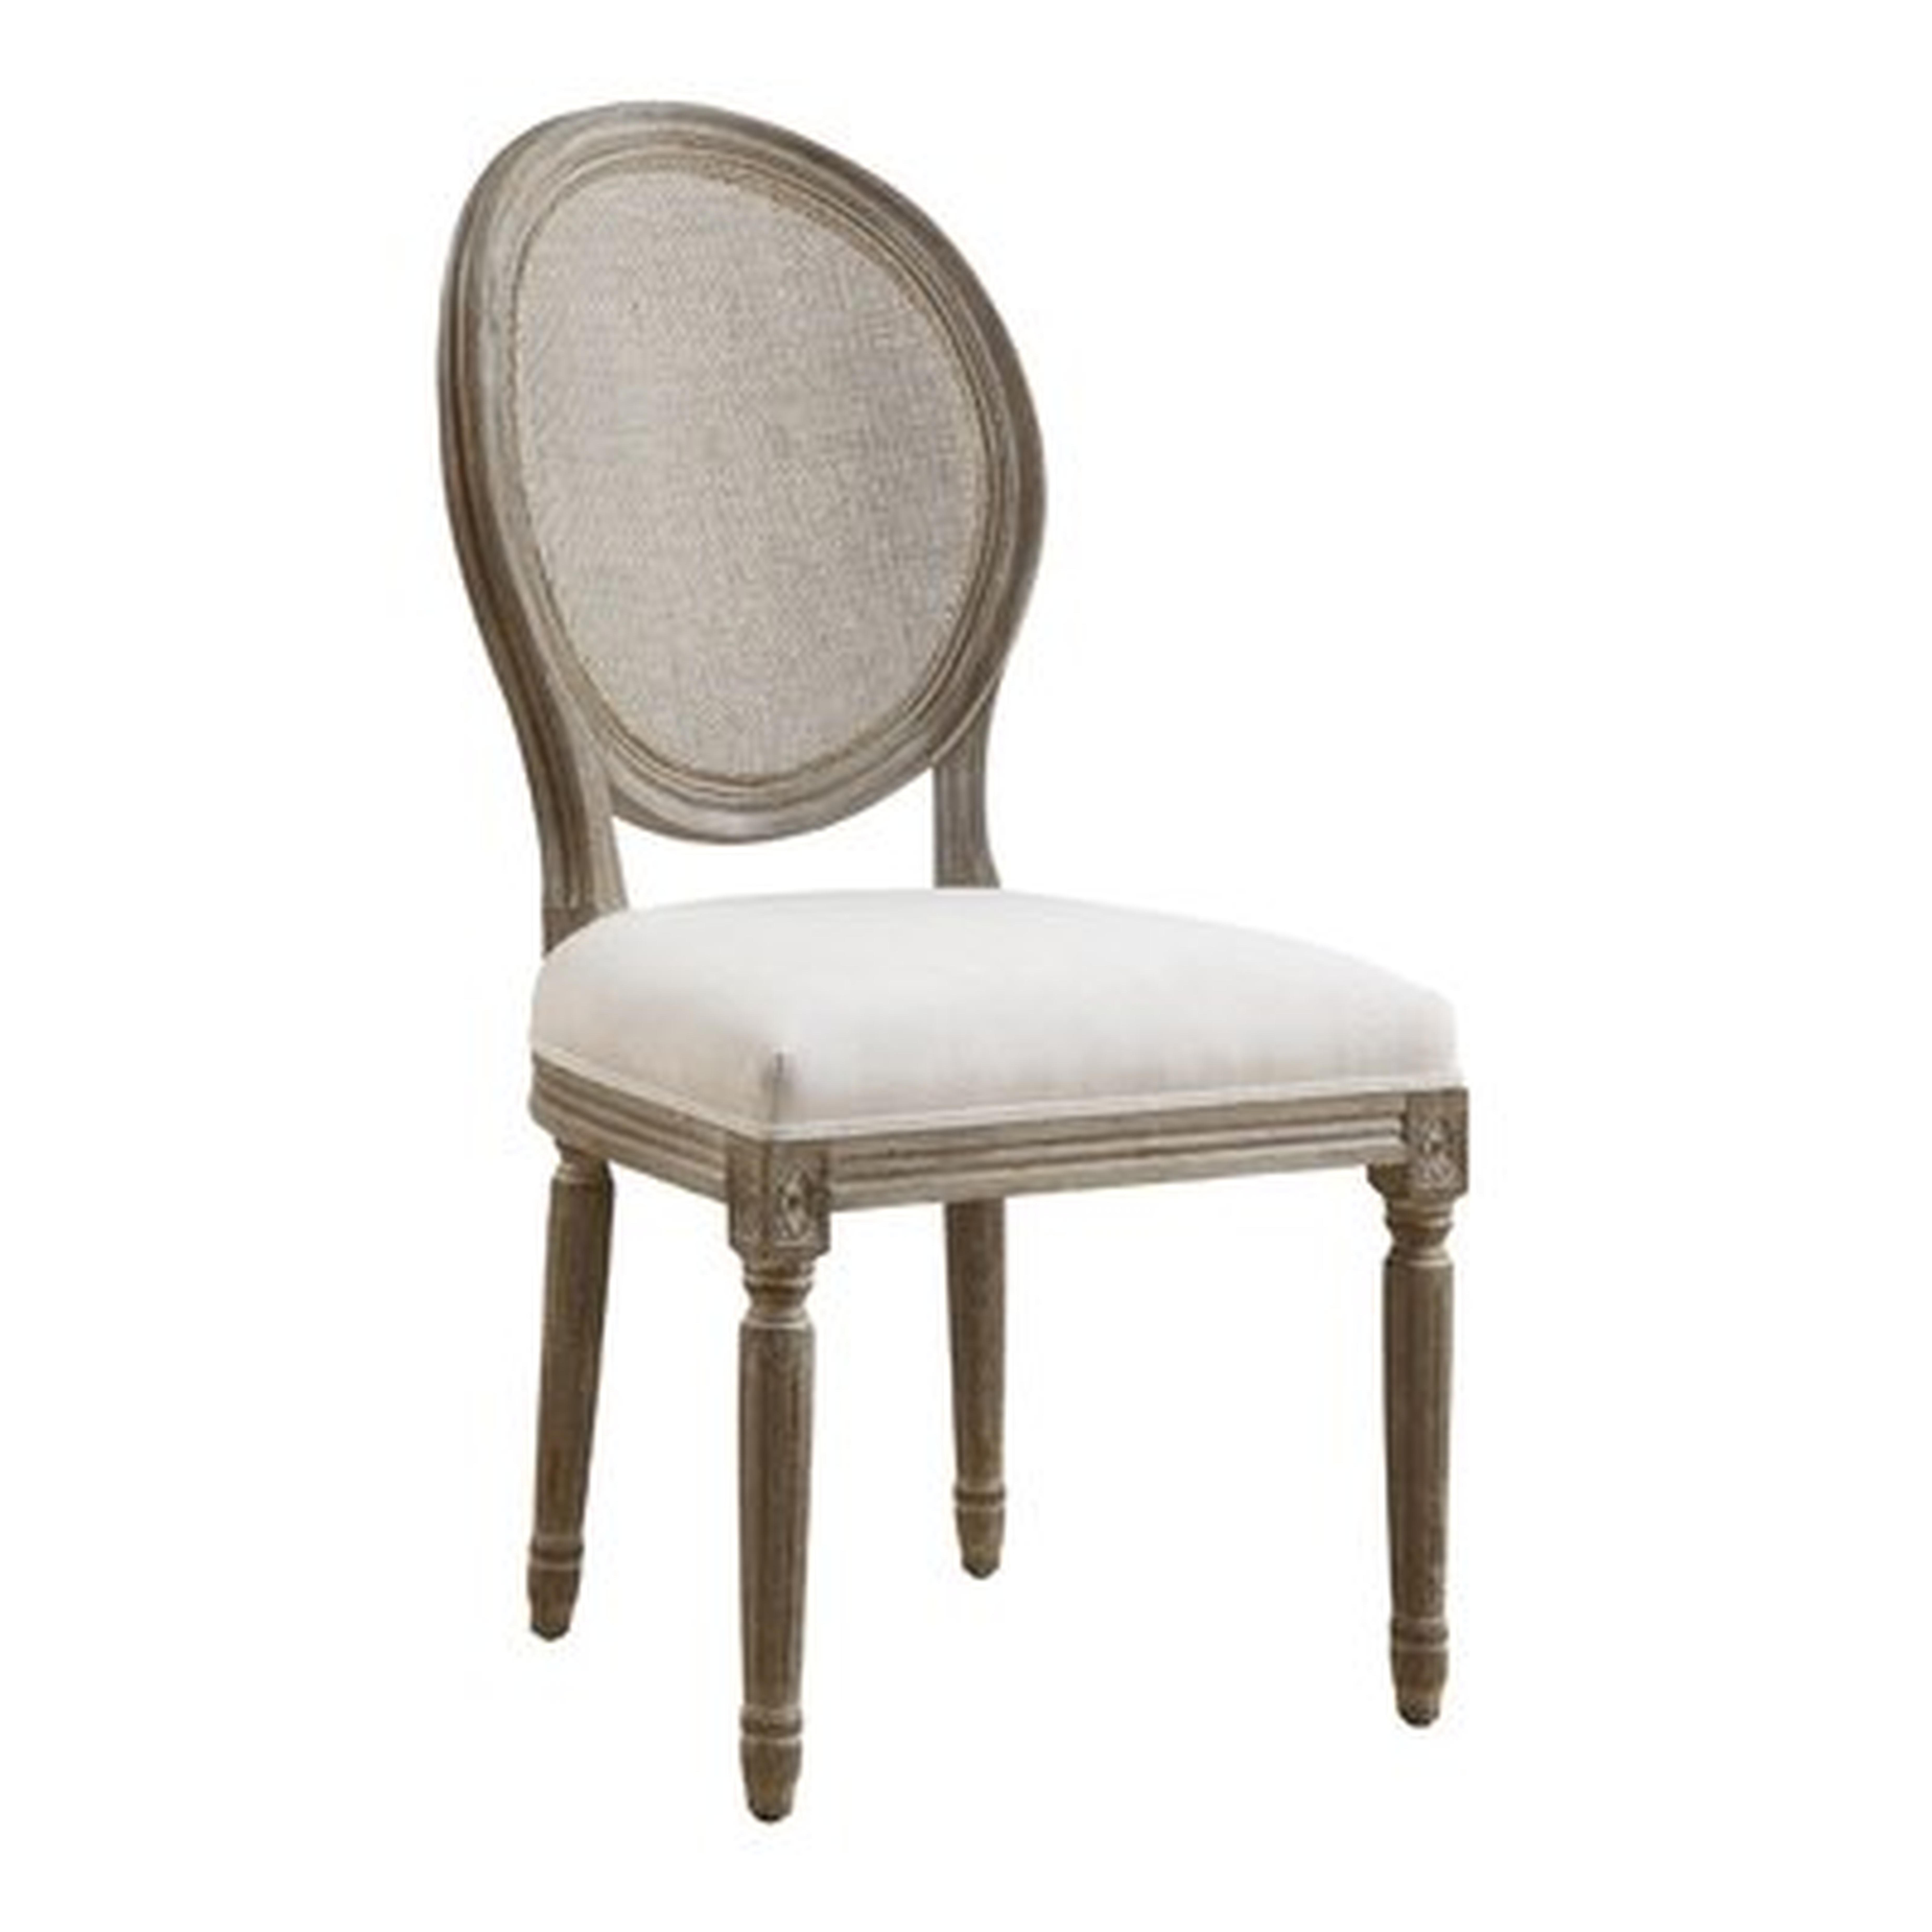 Duffield Upholstered Dining Chair - Wayfair